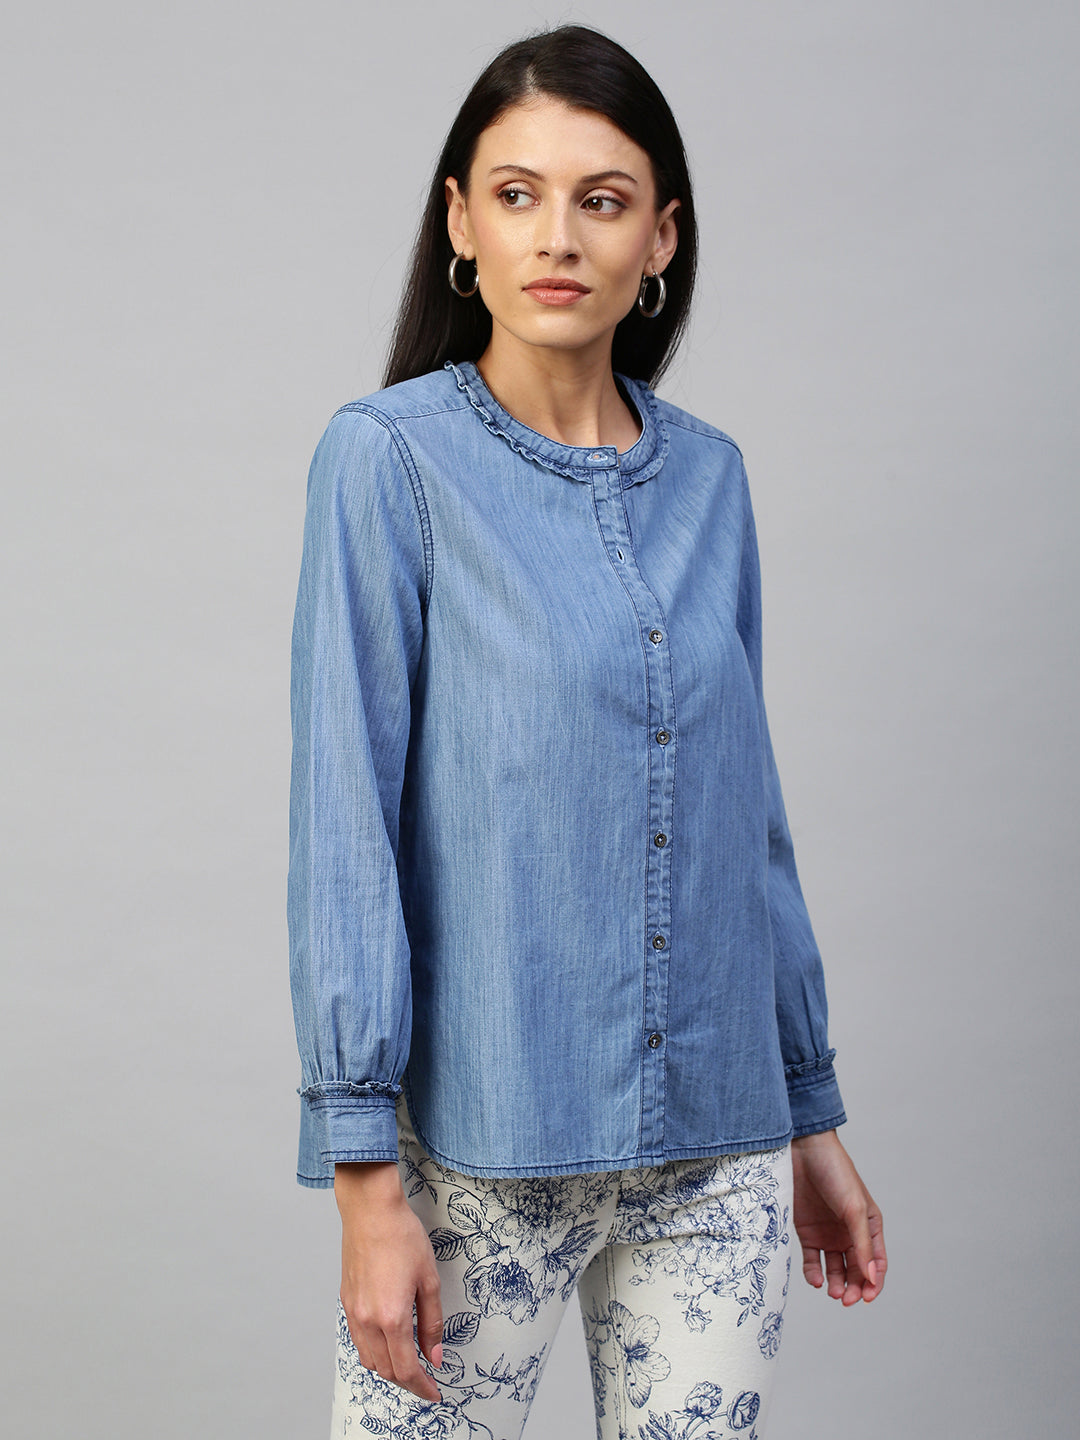 Mid Wash Blue, Light Weight Denim Full Sleeved Shirt With Frill Detailing Around Collar & Cuff